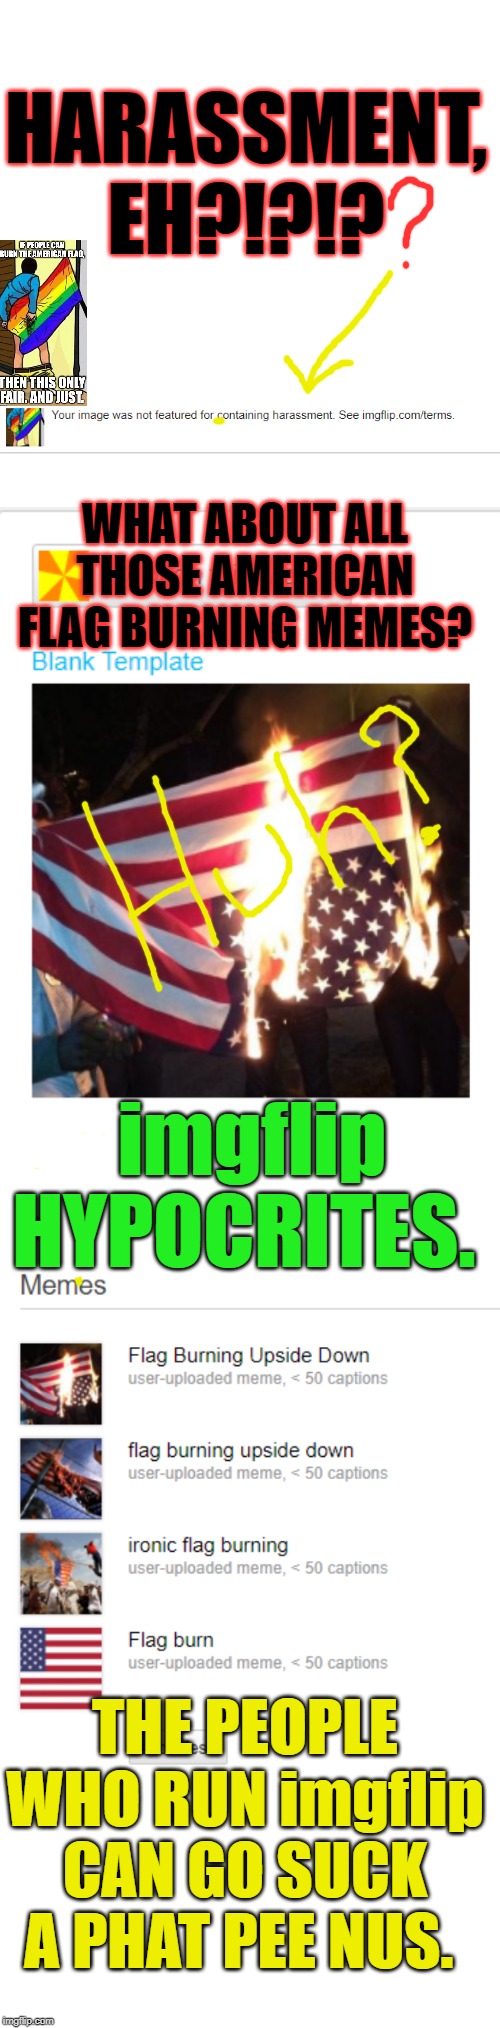 The people who run imgflip are hypocrites. | HARASSMENT, EH?!?!? WHAT ABOUT ALL THOSE AMERICAN FLAG BURNING MEMES? imgflip HYPOCRITES. THE PEOPLE WHO RUN imgflip CAN GO SUCK A PHAT PEE NUS. | image tagged in imgflip,imgflip users,meanwhile on imgflip,imgflip community,imgflip mods,imgflip unite | made w/ Imgflip meme maker